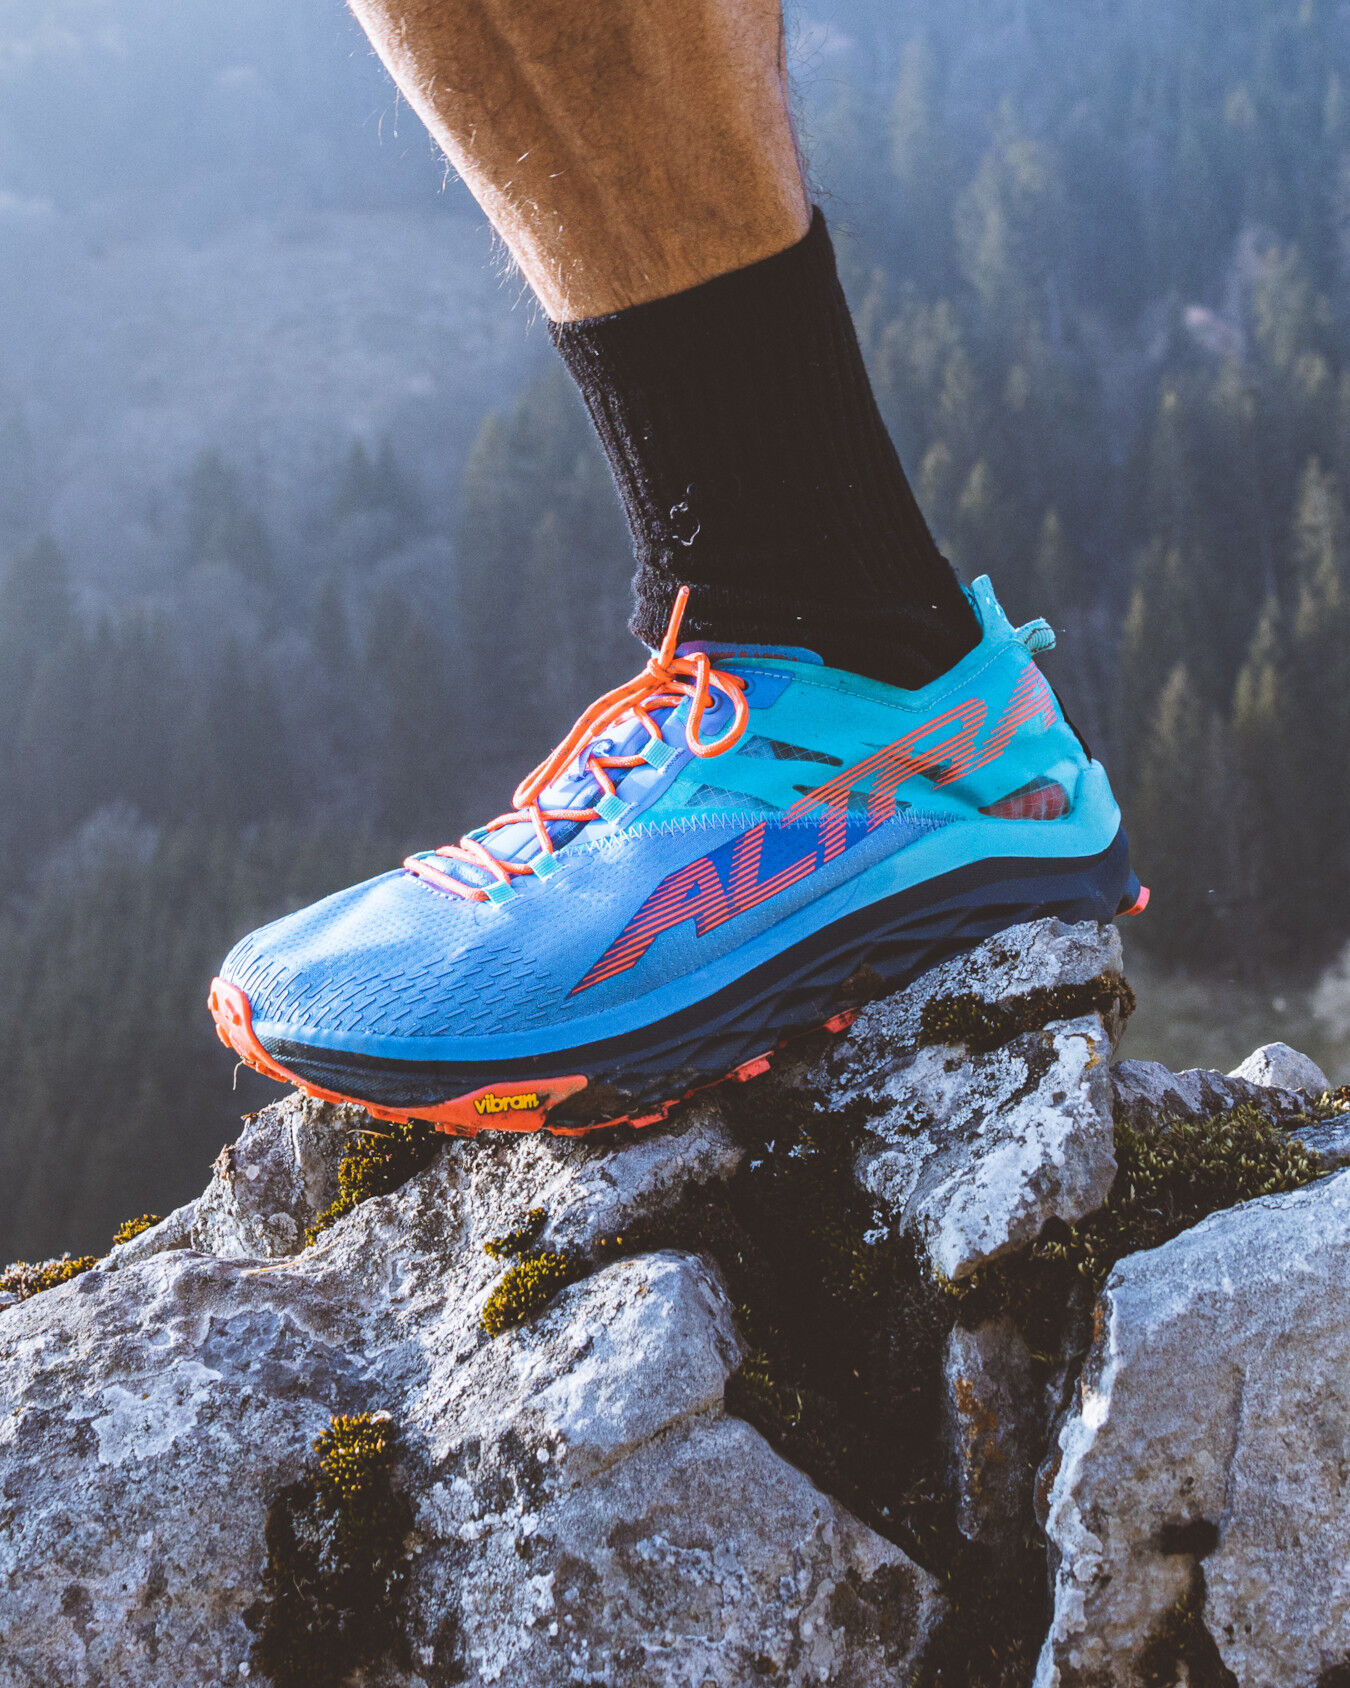 Vibram X Altra: find out more about the collaboration | Vibram